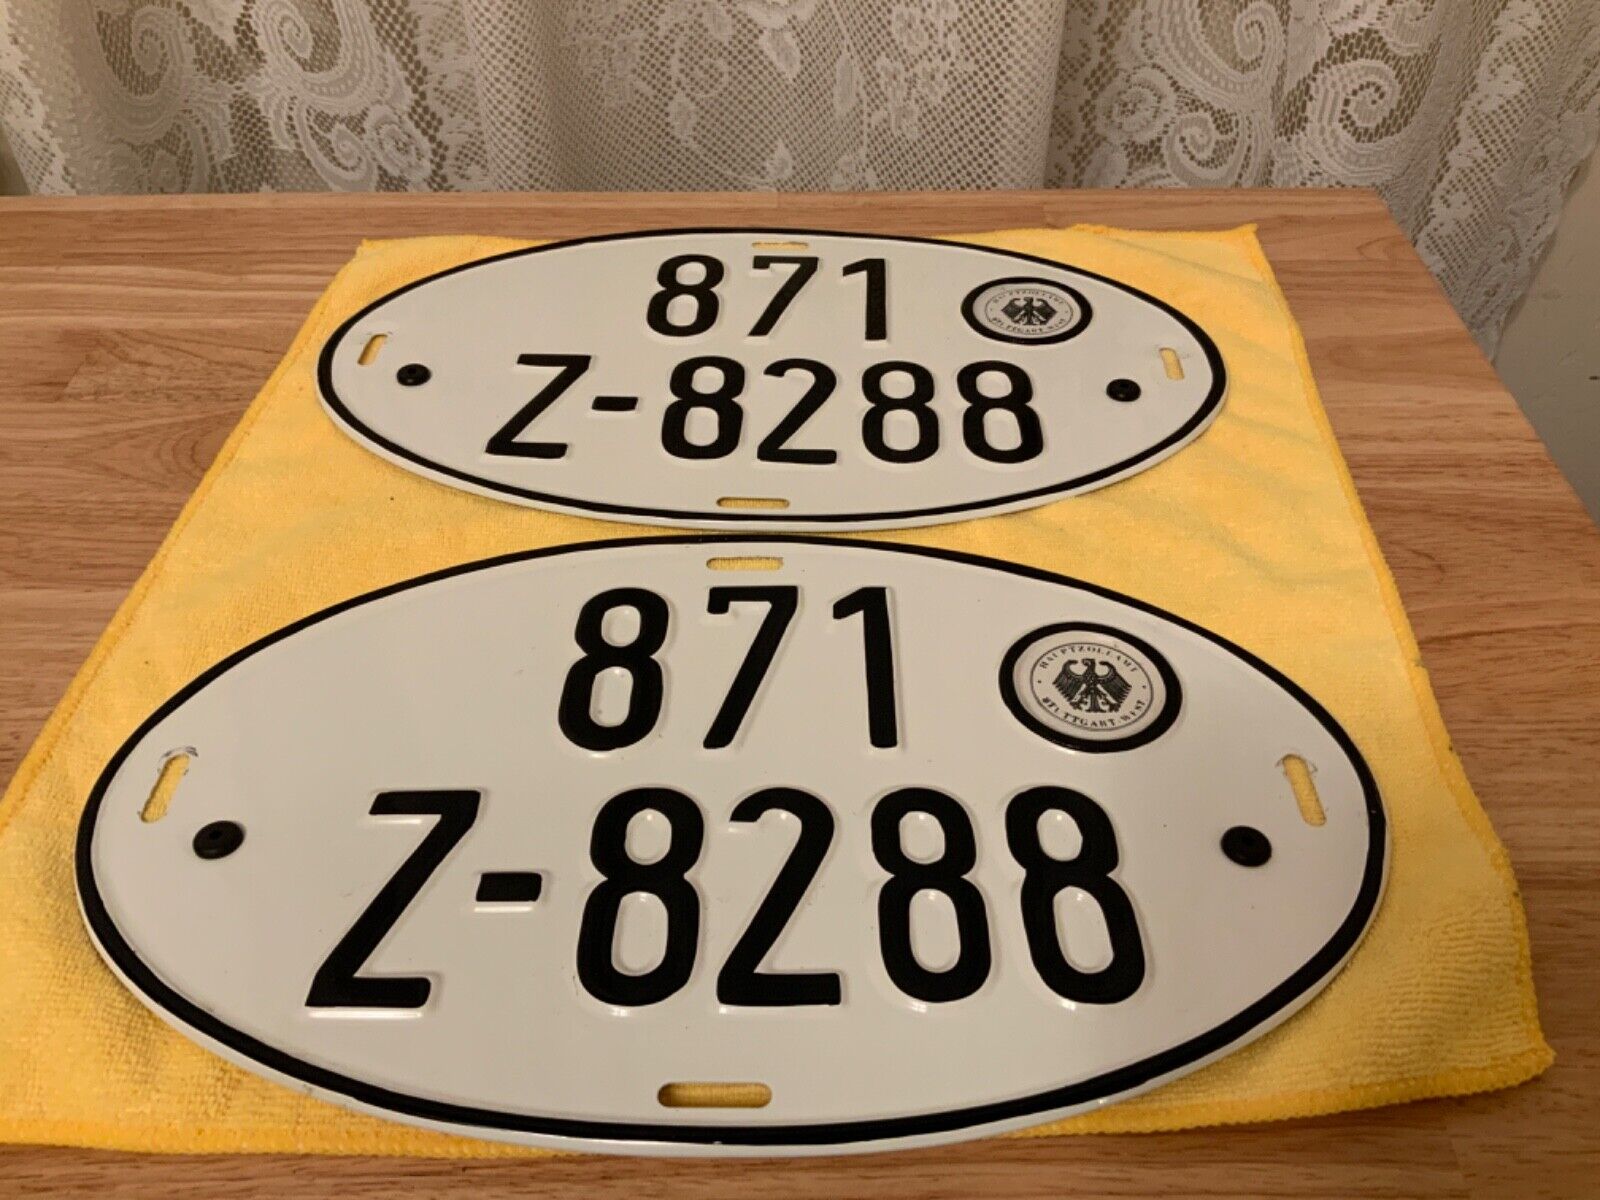 VINTAGE PRE-EUROPEAN UNION OVAL  LICENSE PLATES FROM WEST GERMANY 871 Z-8288